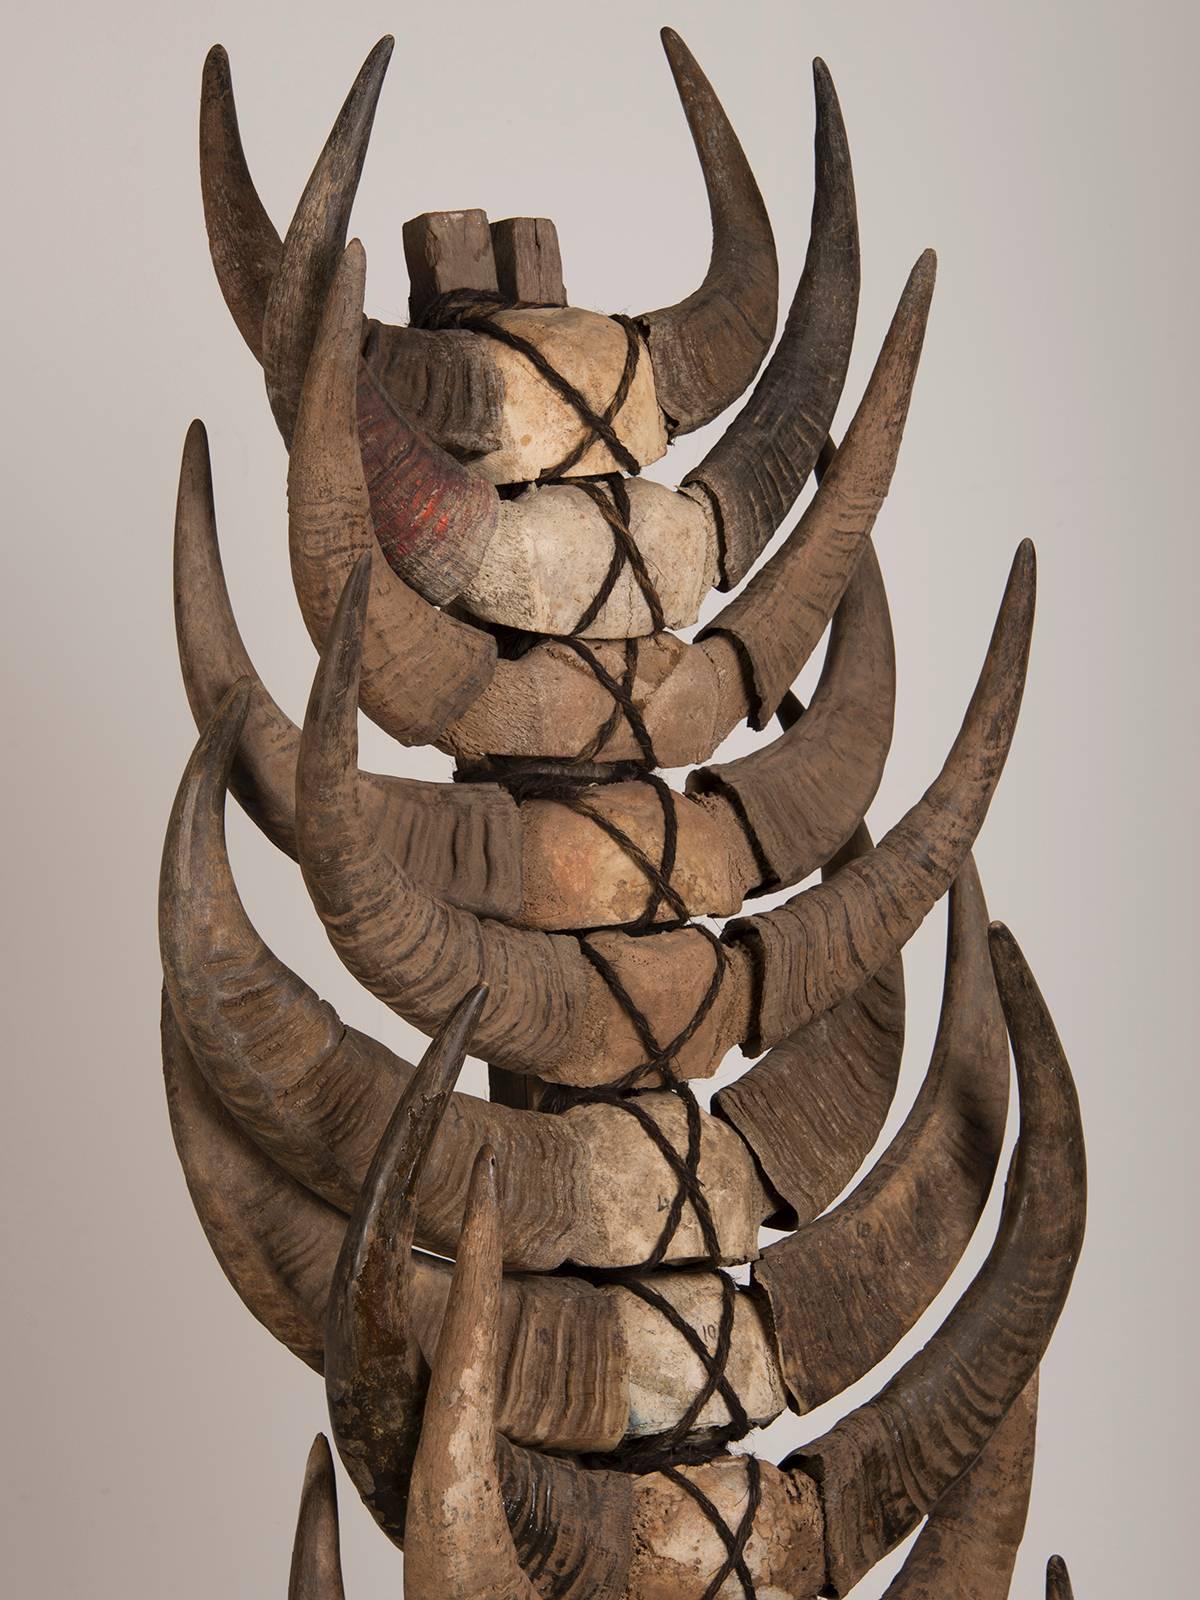 Receive our new selections direct from 1stdibs by email each week. Please click Follow Dealer below and see them first!

Vintage shed water buffalo horns mounted on a custom stand, Indonesia. This striking sculpture is composed entirely of shed